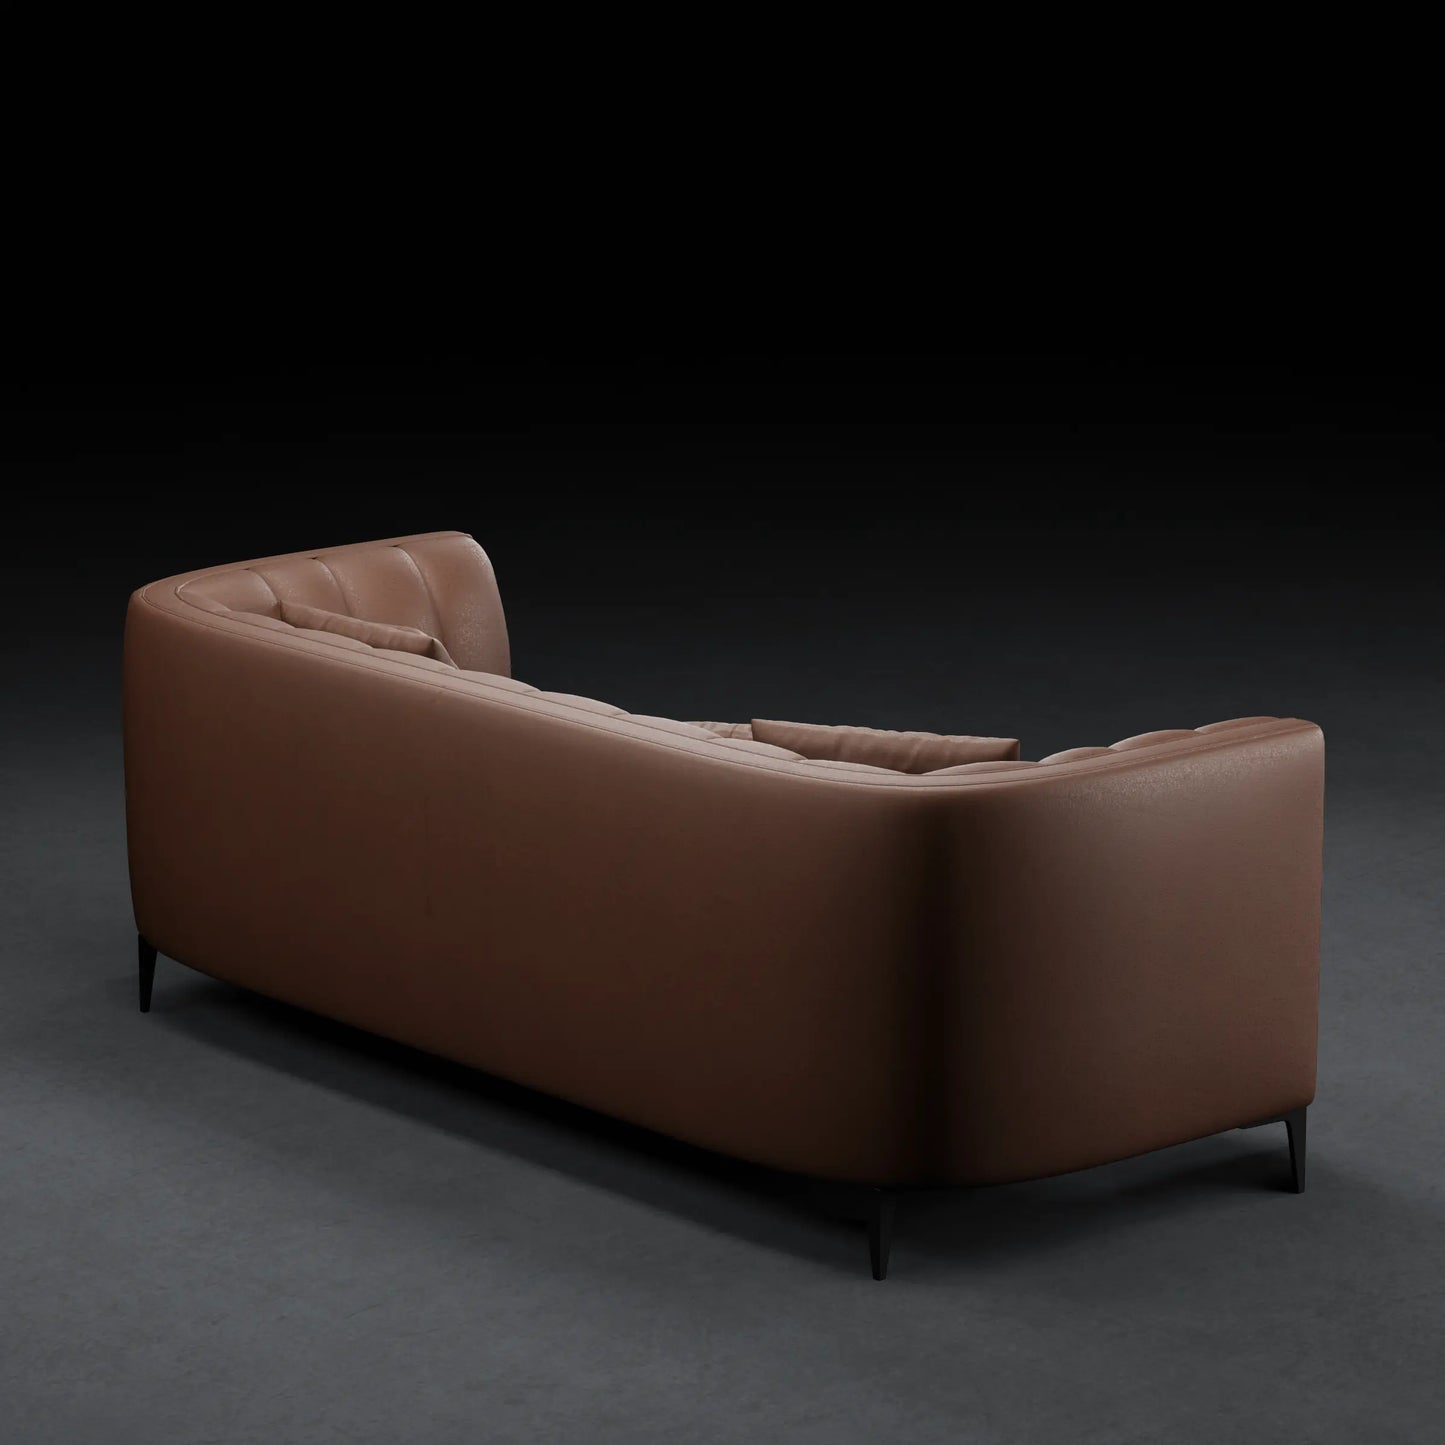 JASMINE - 2 Seater XL Couch in Leather Finish | Brown Color